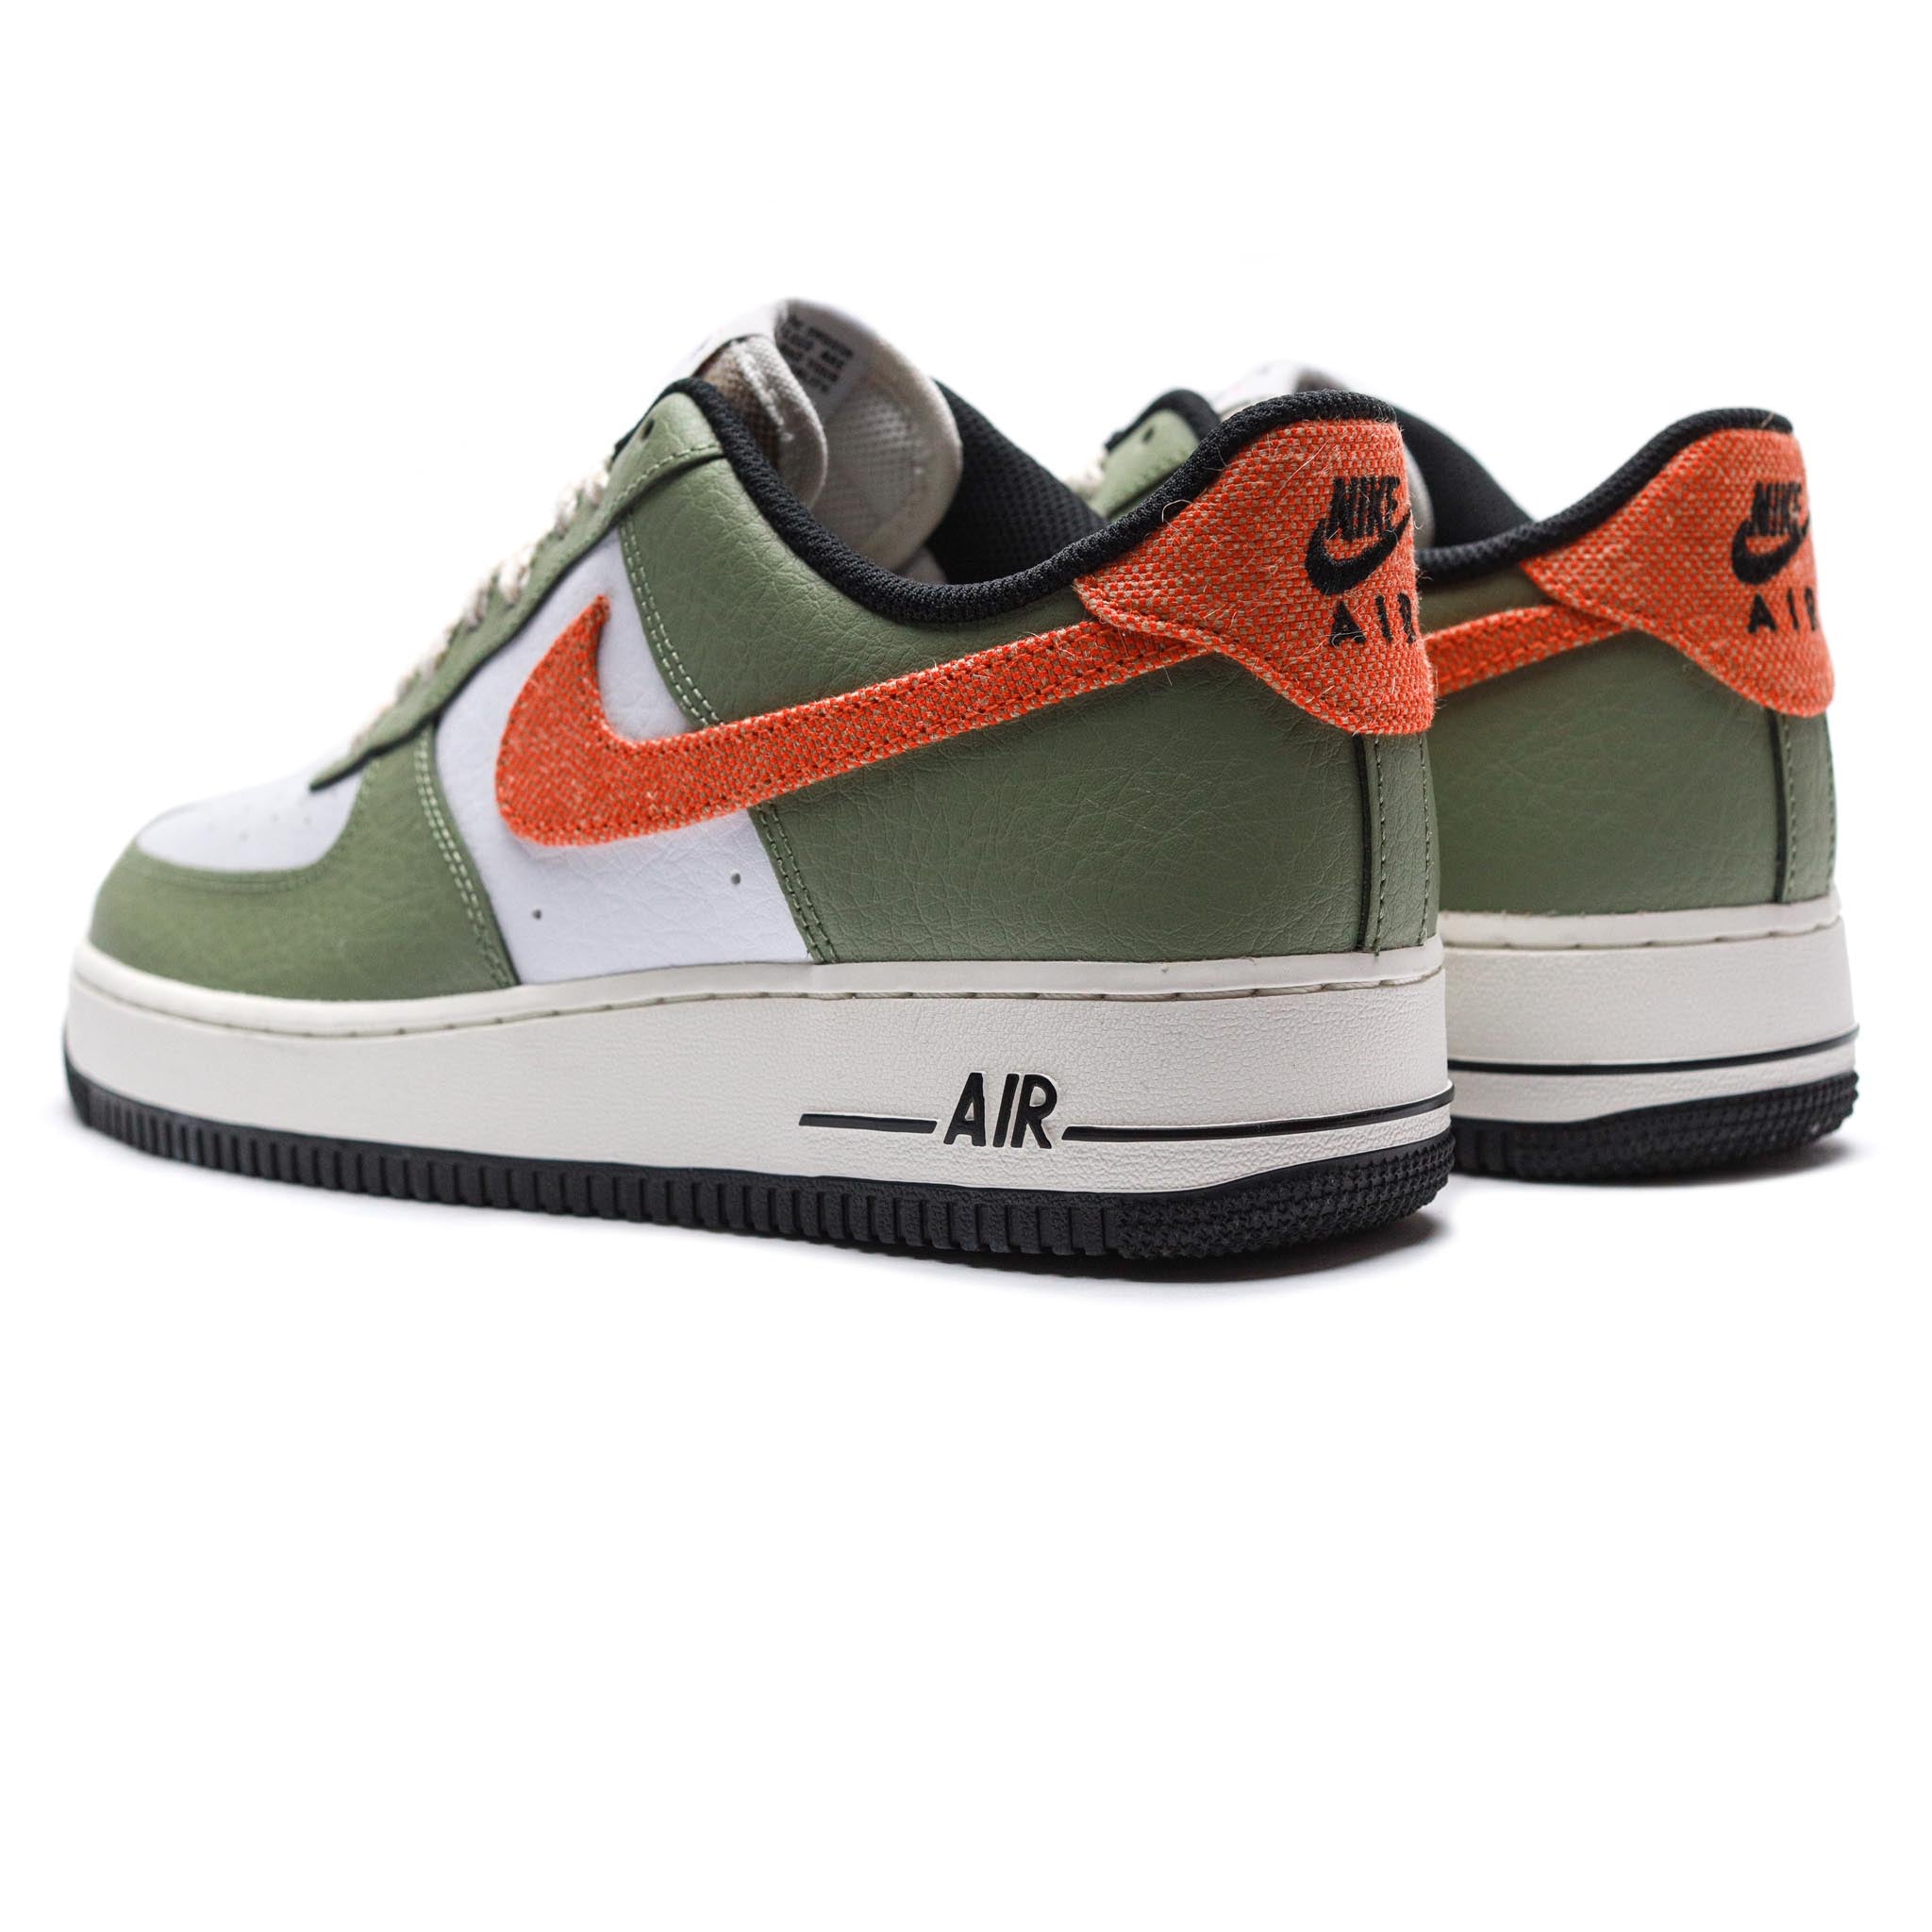 Nike Air Force 1 '07 'Oil Green/Safety Orange'